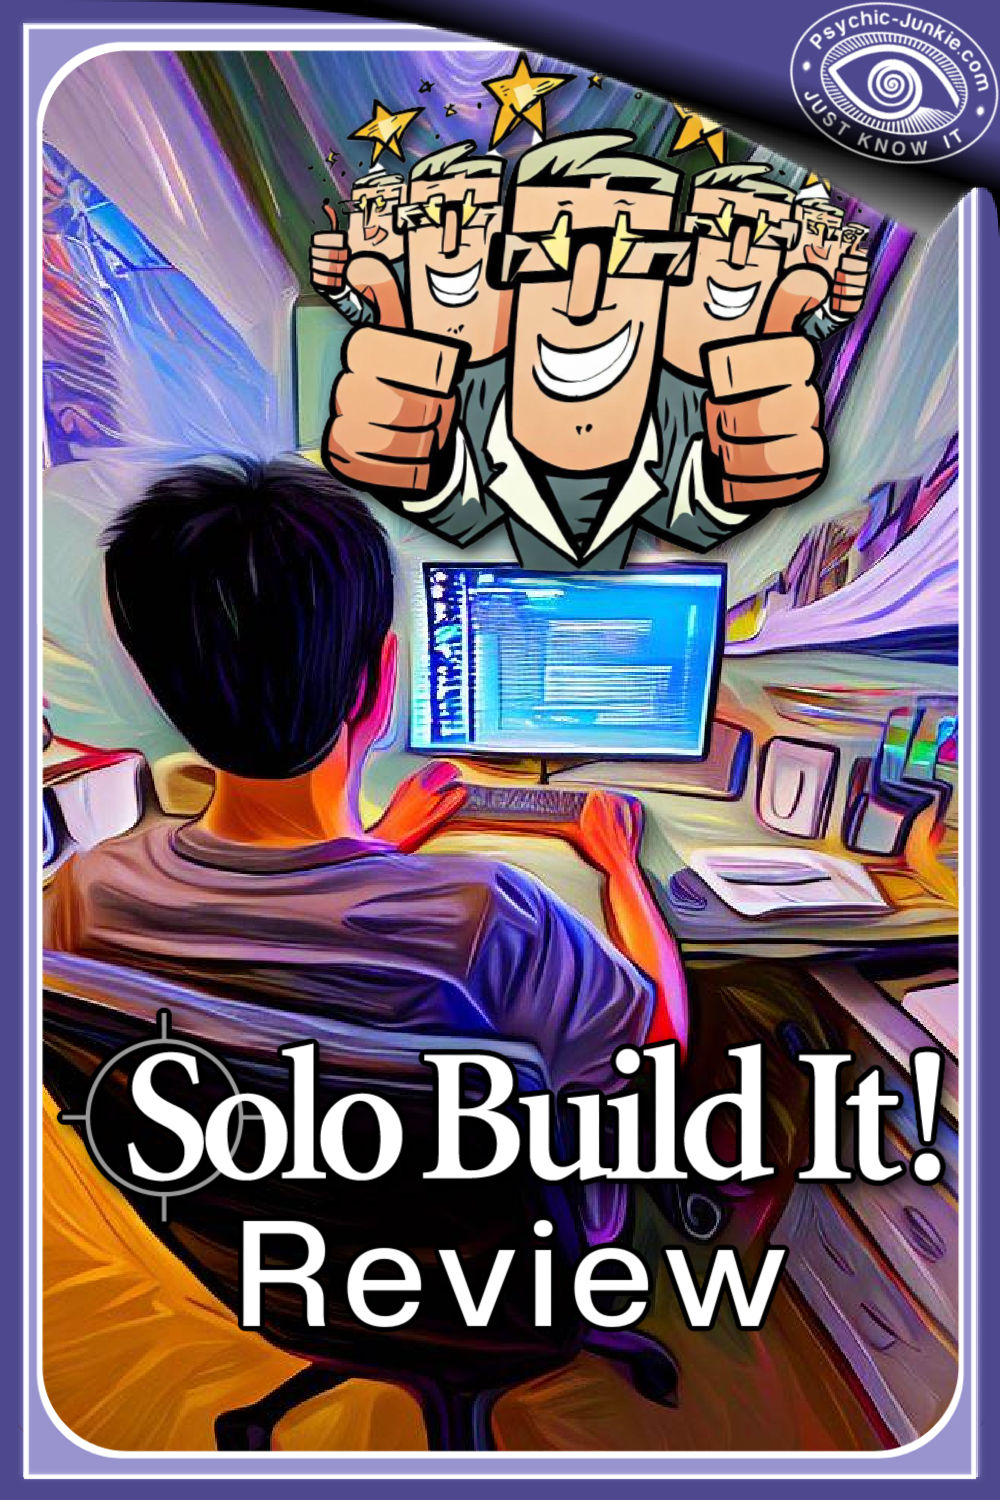 My Solo Build It Review - After 18 years of using it.